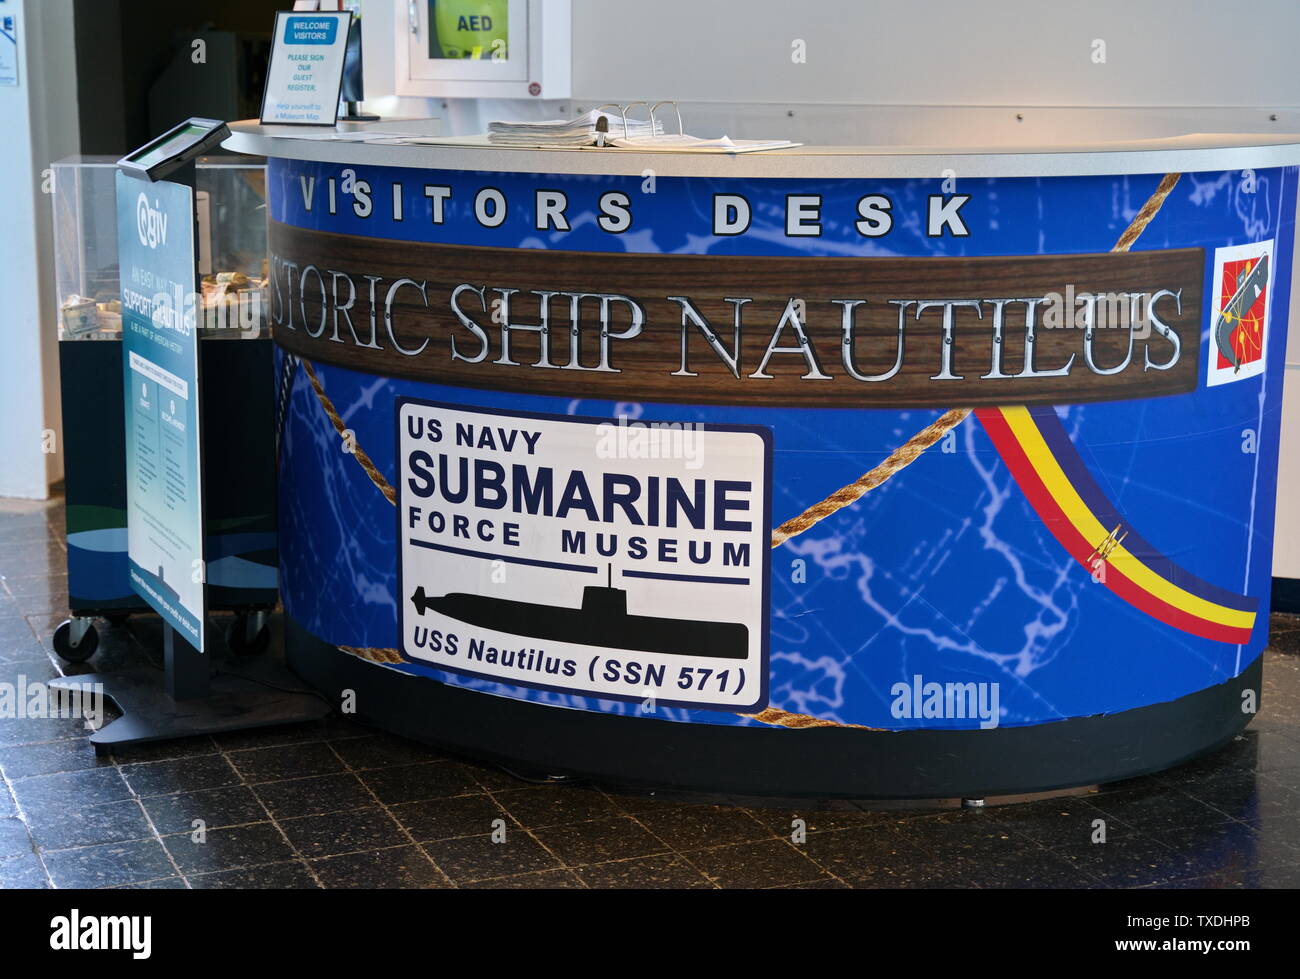 Submarine Force Museum, Groton CT USA, Jun 2019. Visitor desk for helpful information. Stock Photo